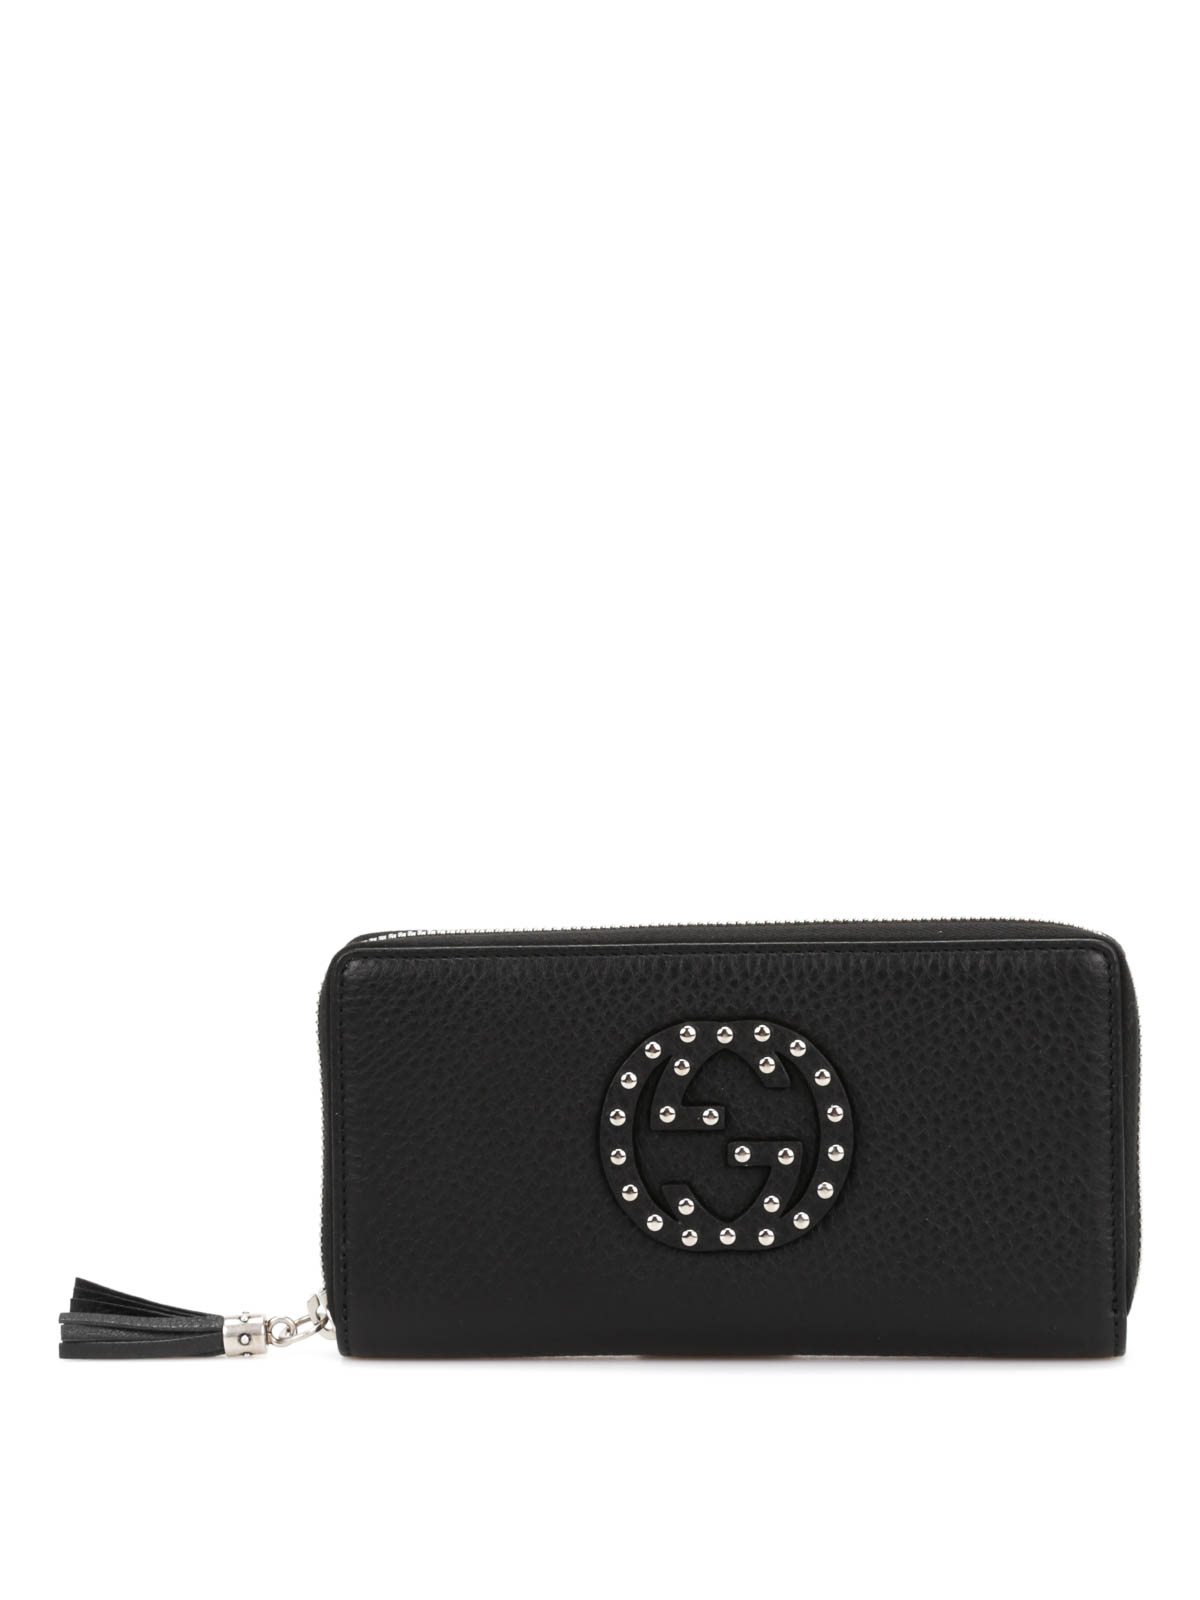 Burberry Studded Leather Zip Around Wallet Black